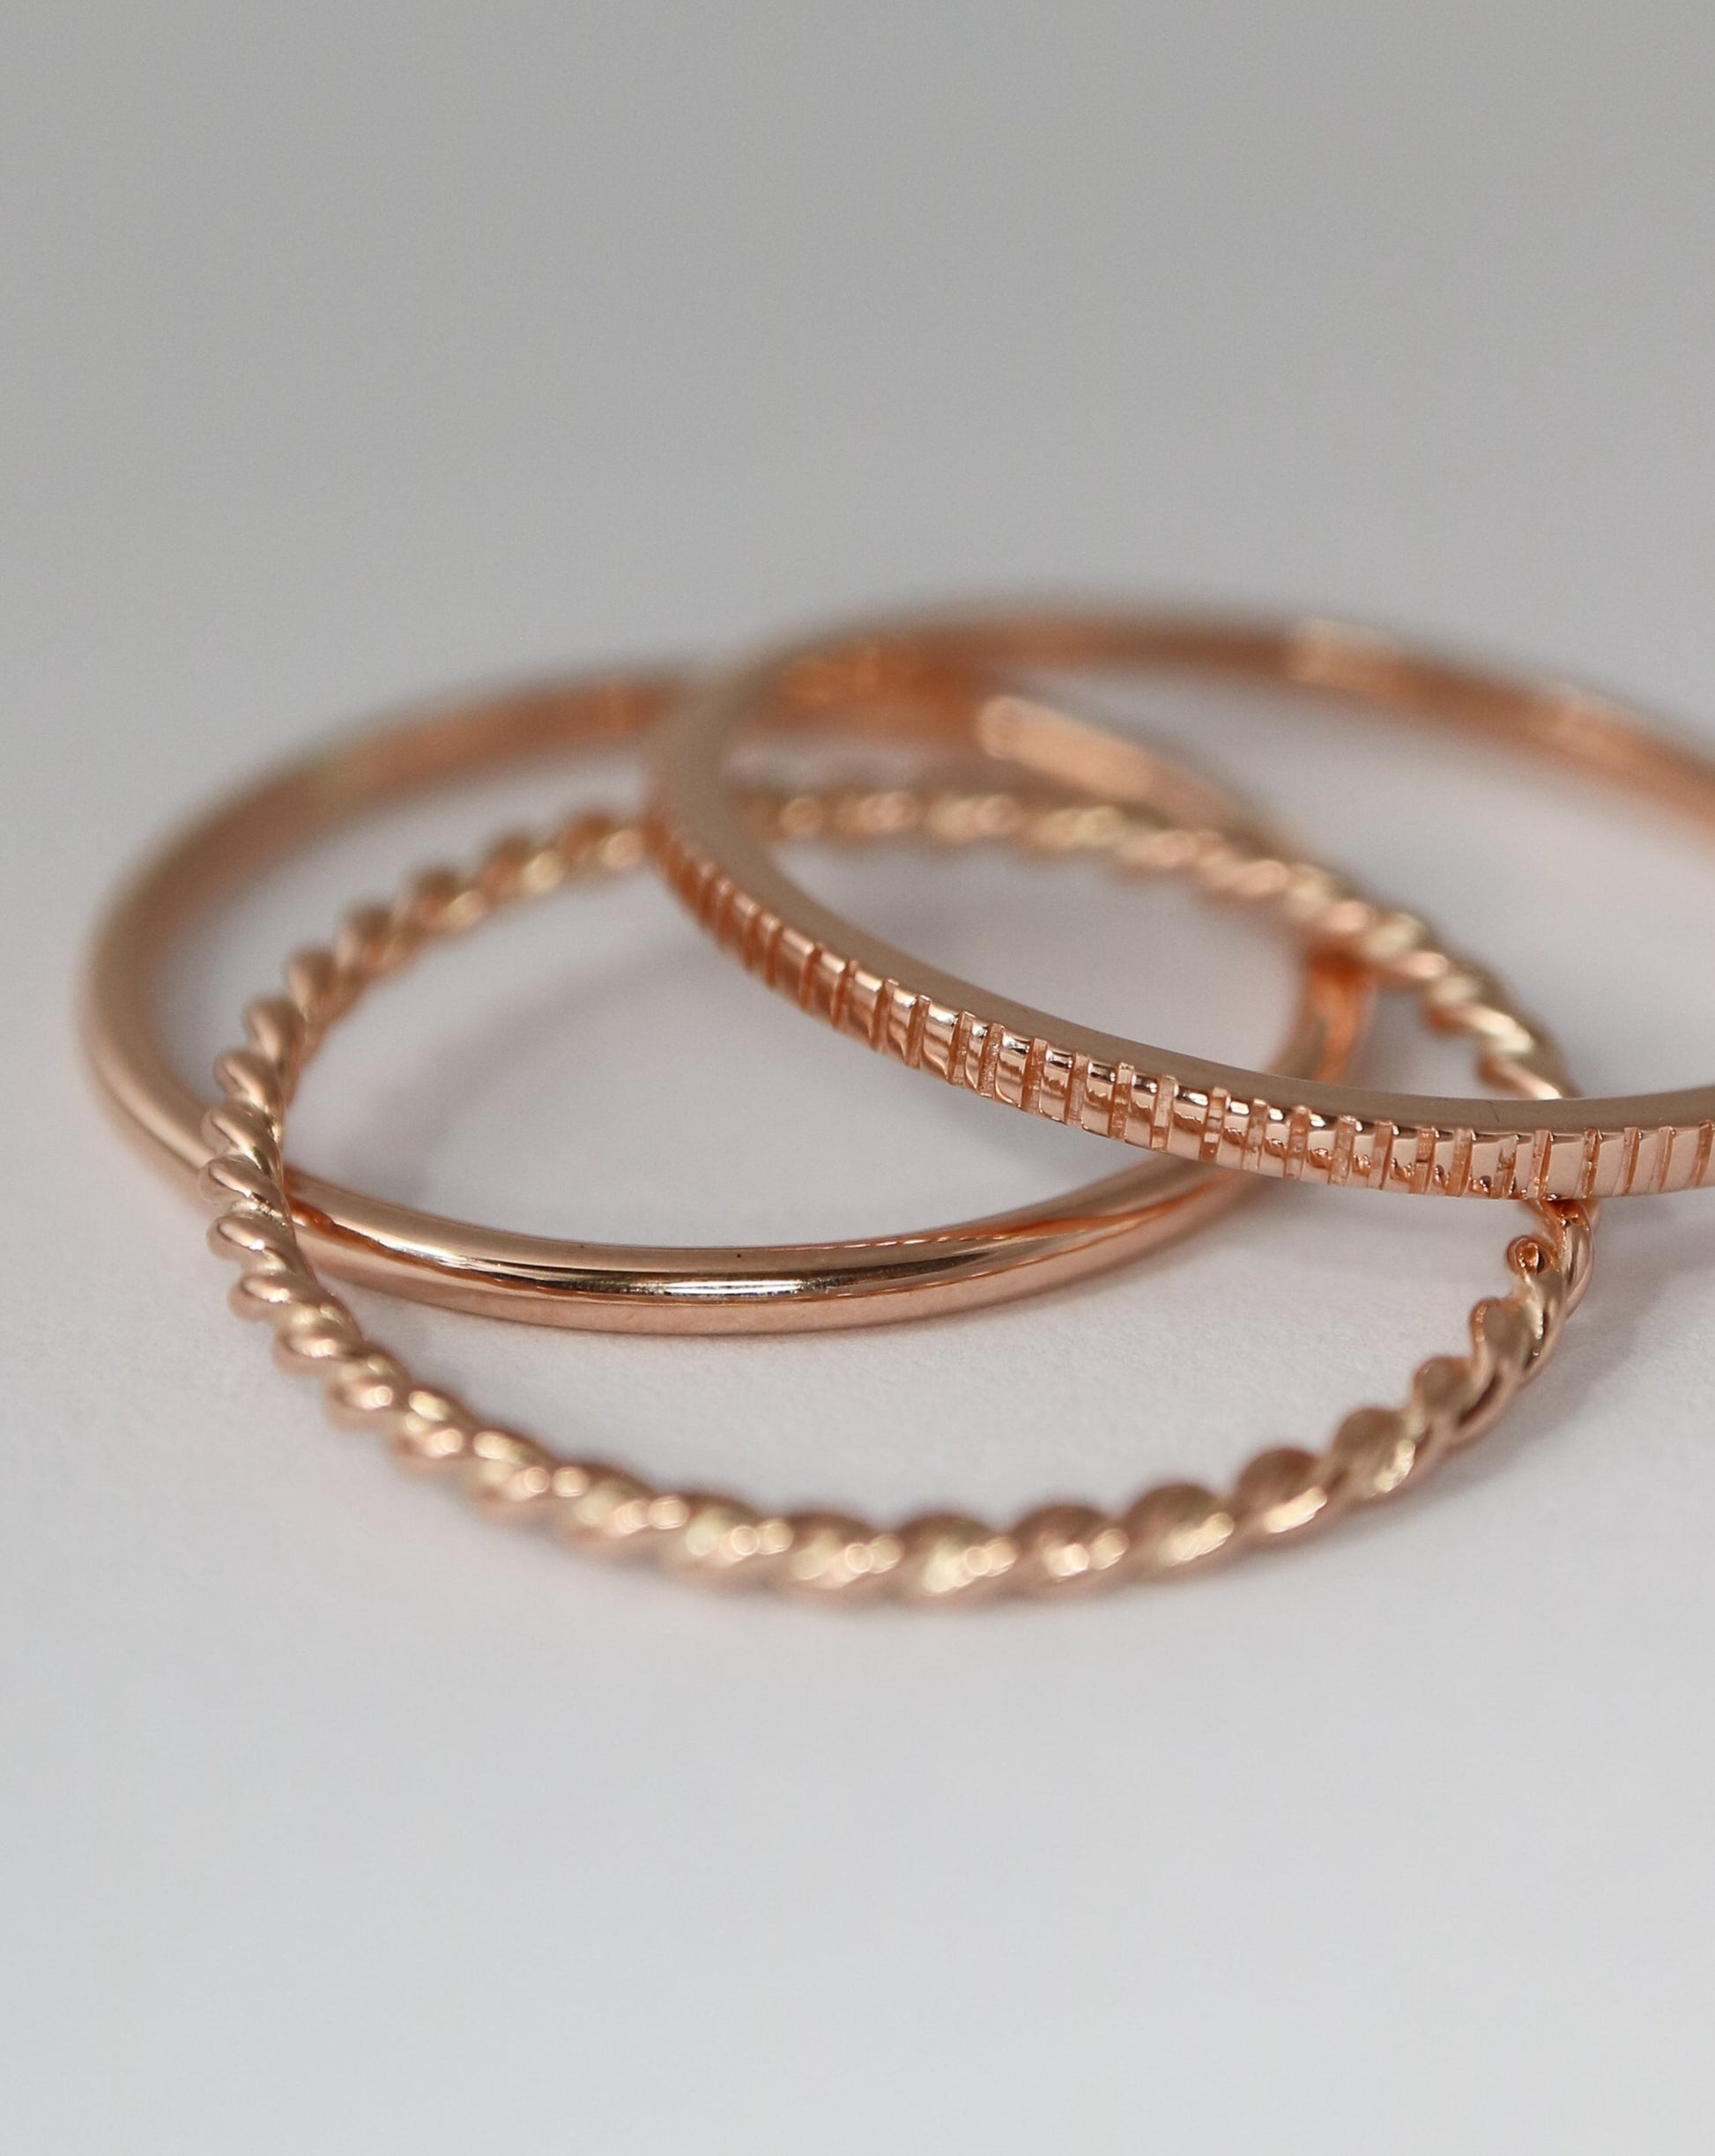 Three stacking rings in 9ct rose gold